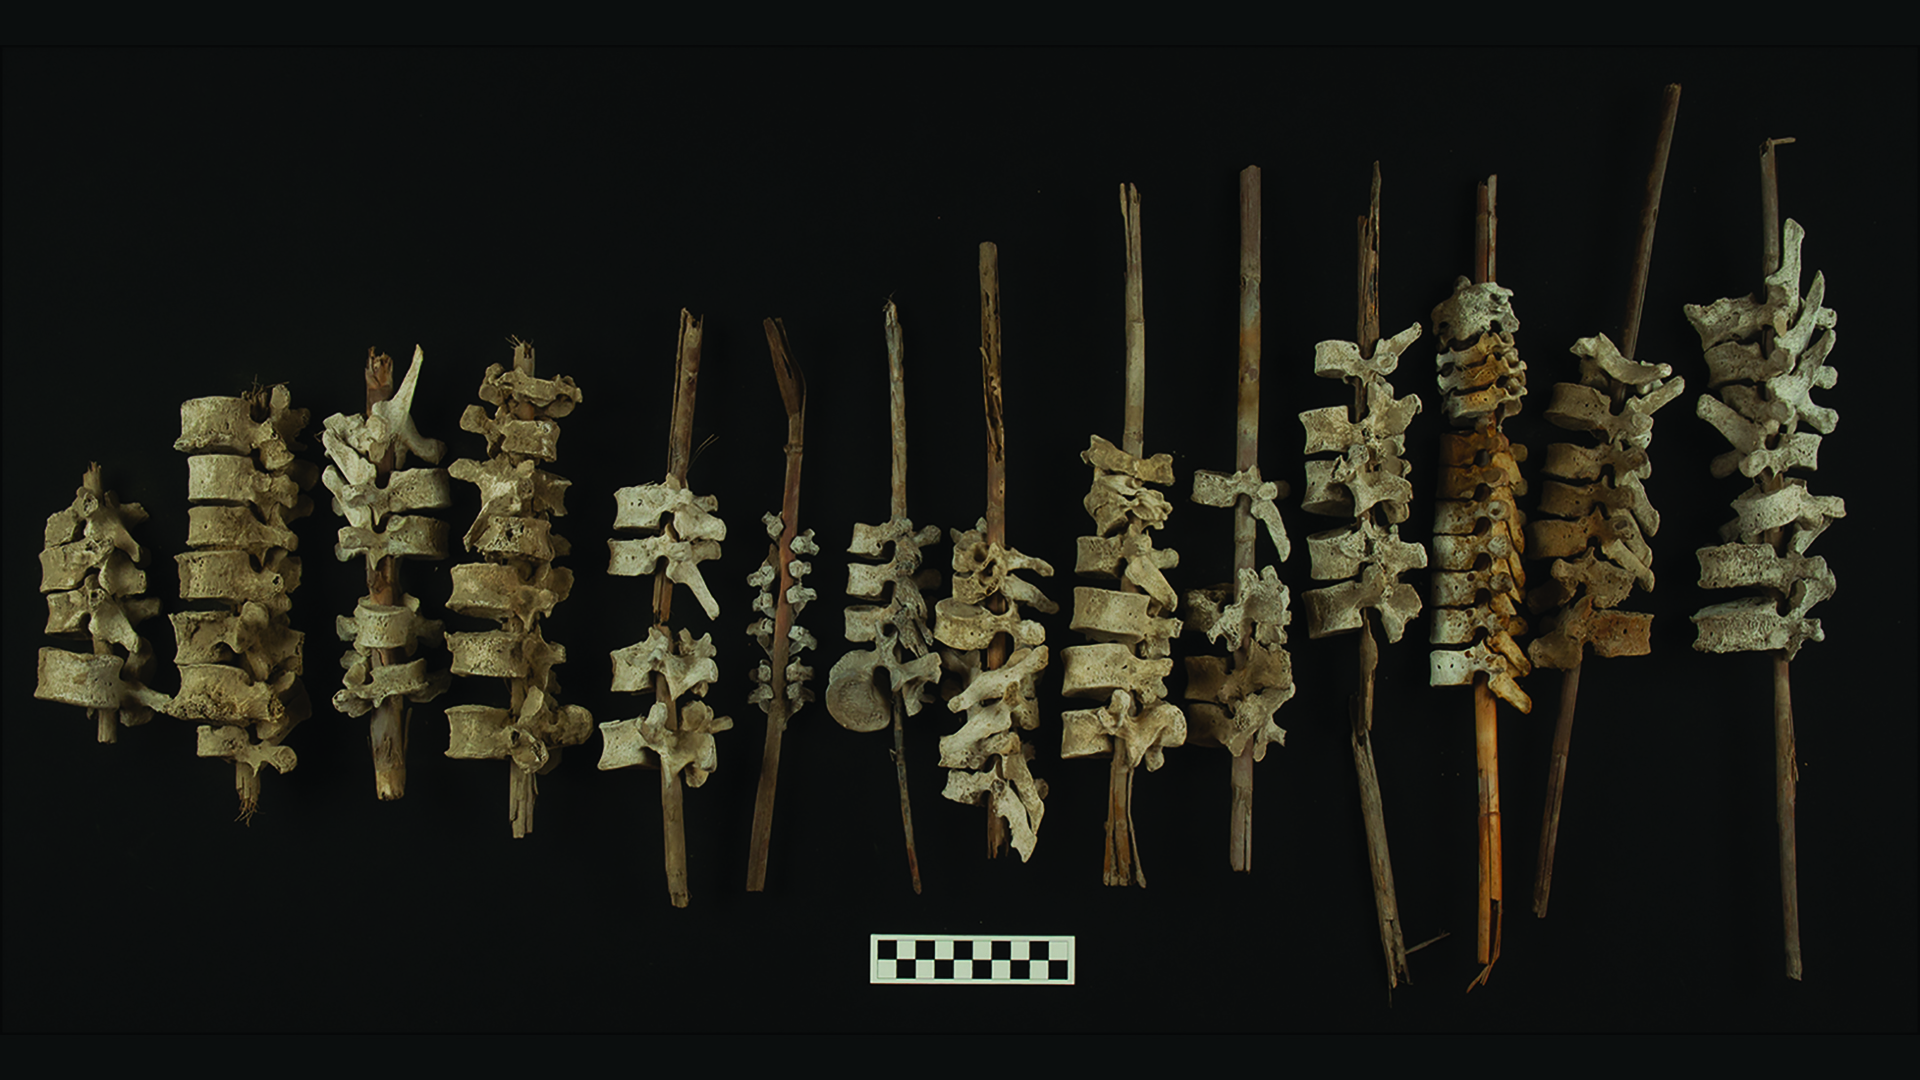 Human spines on sticks found in 500-year-old graves in Peru thumbnail